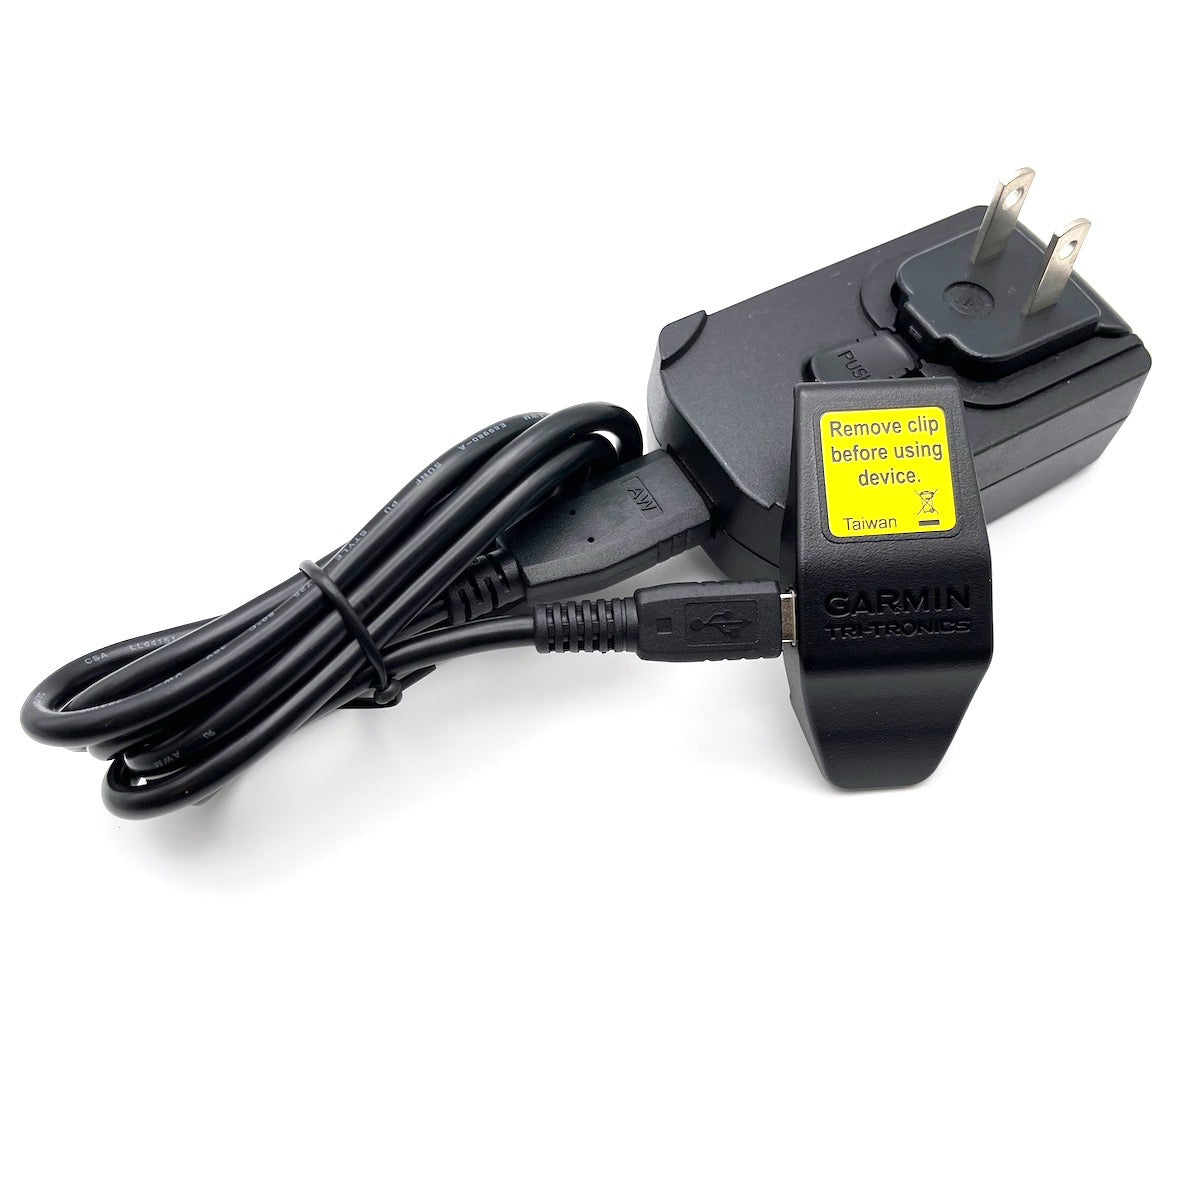 AC Adapter 220V for Garmin T5 KIT with cable and clip Used